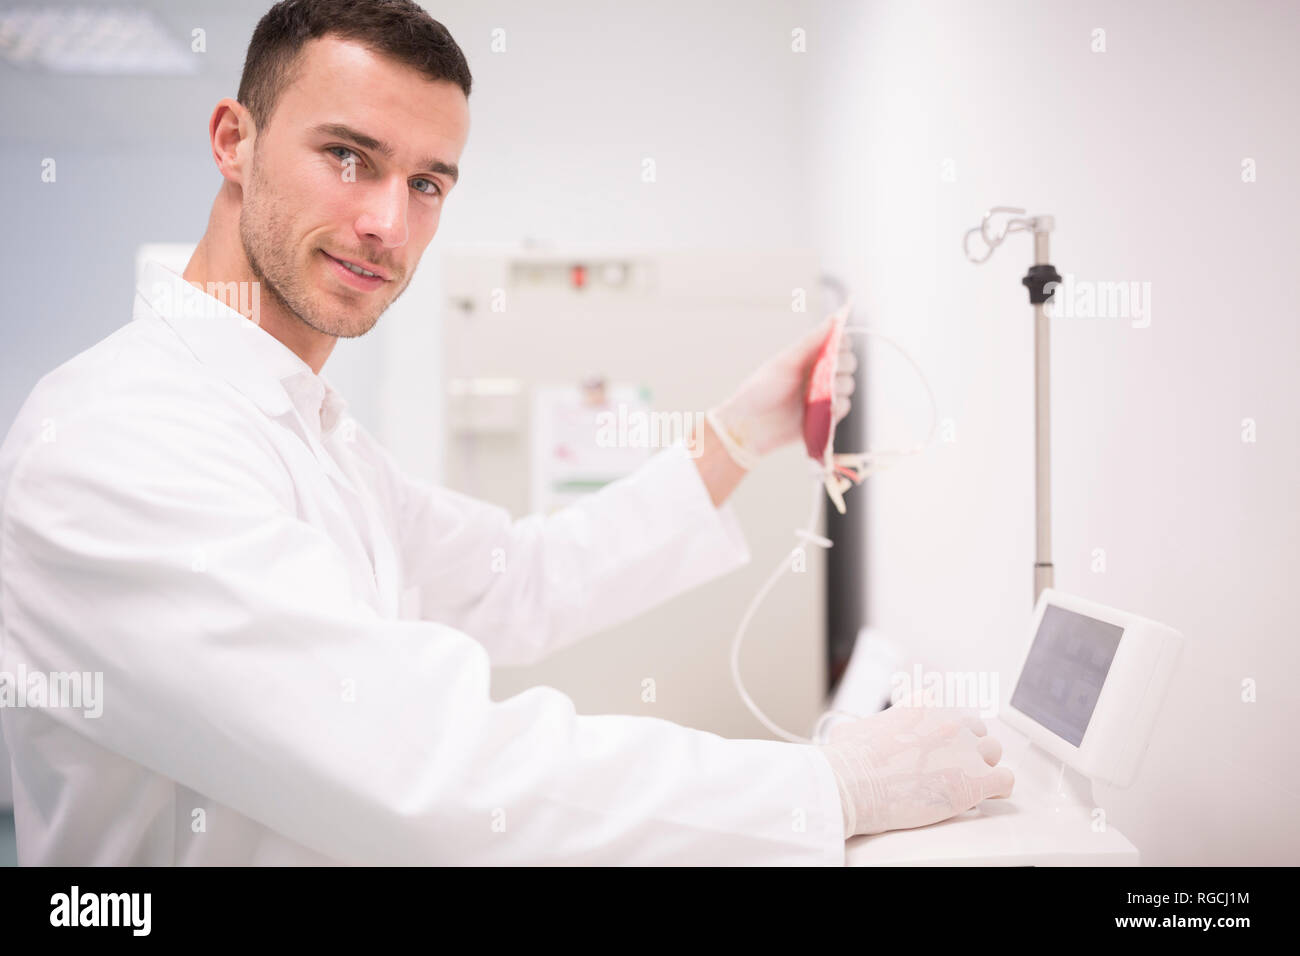 Portrait of smiling lab technician with blood bag Stock Photo